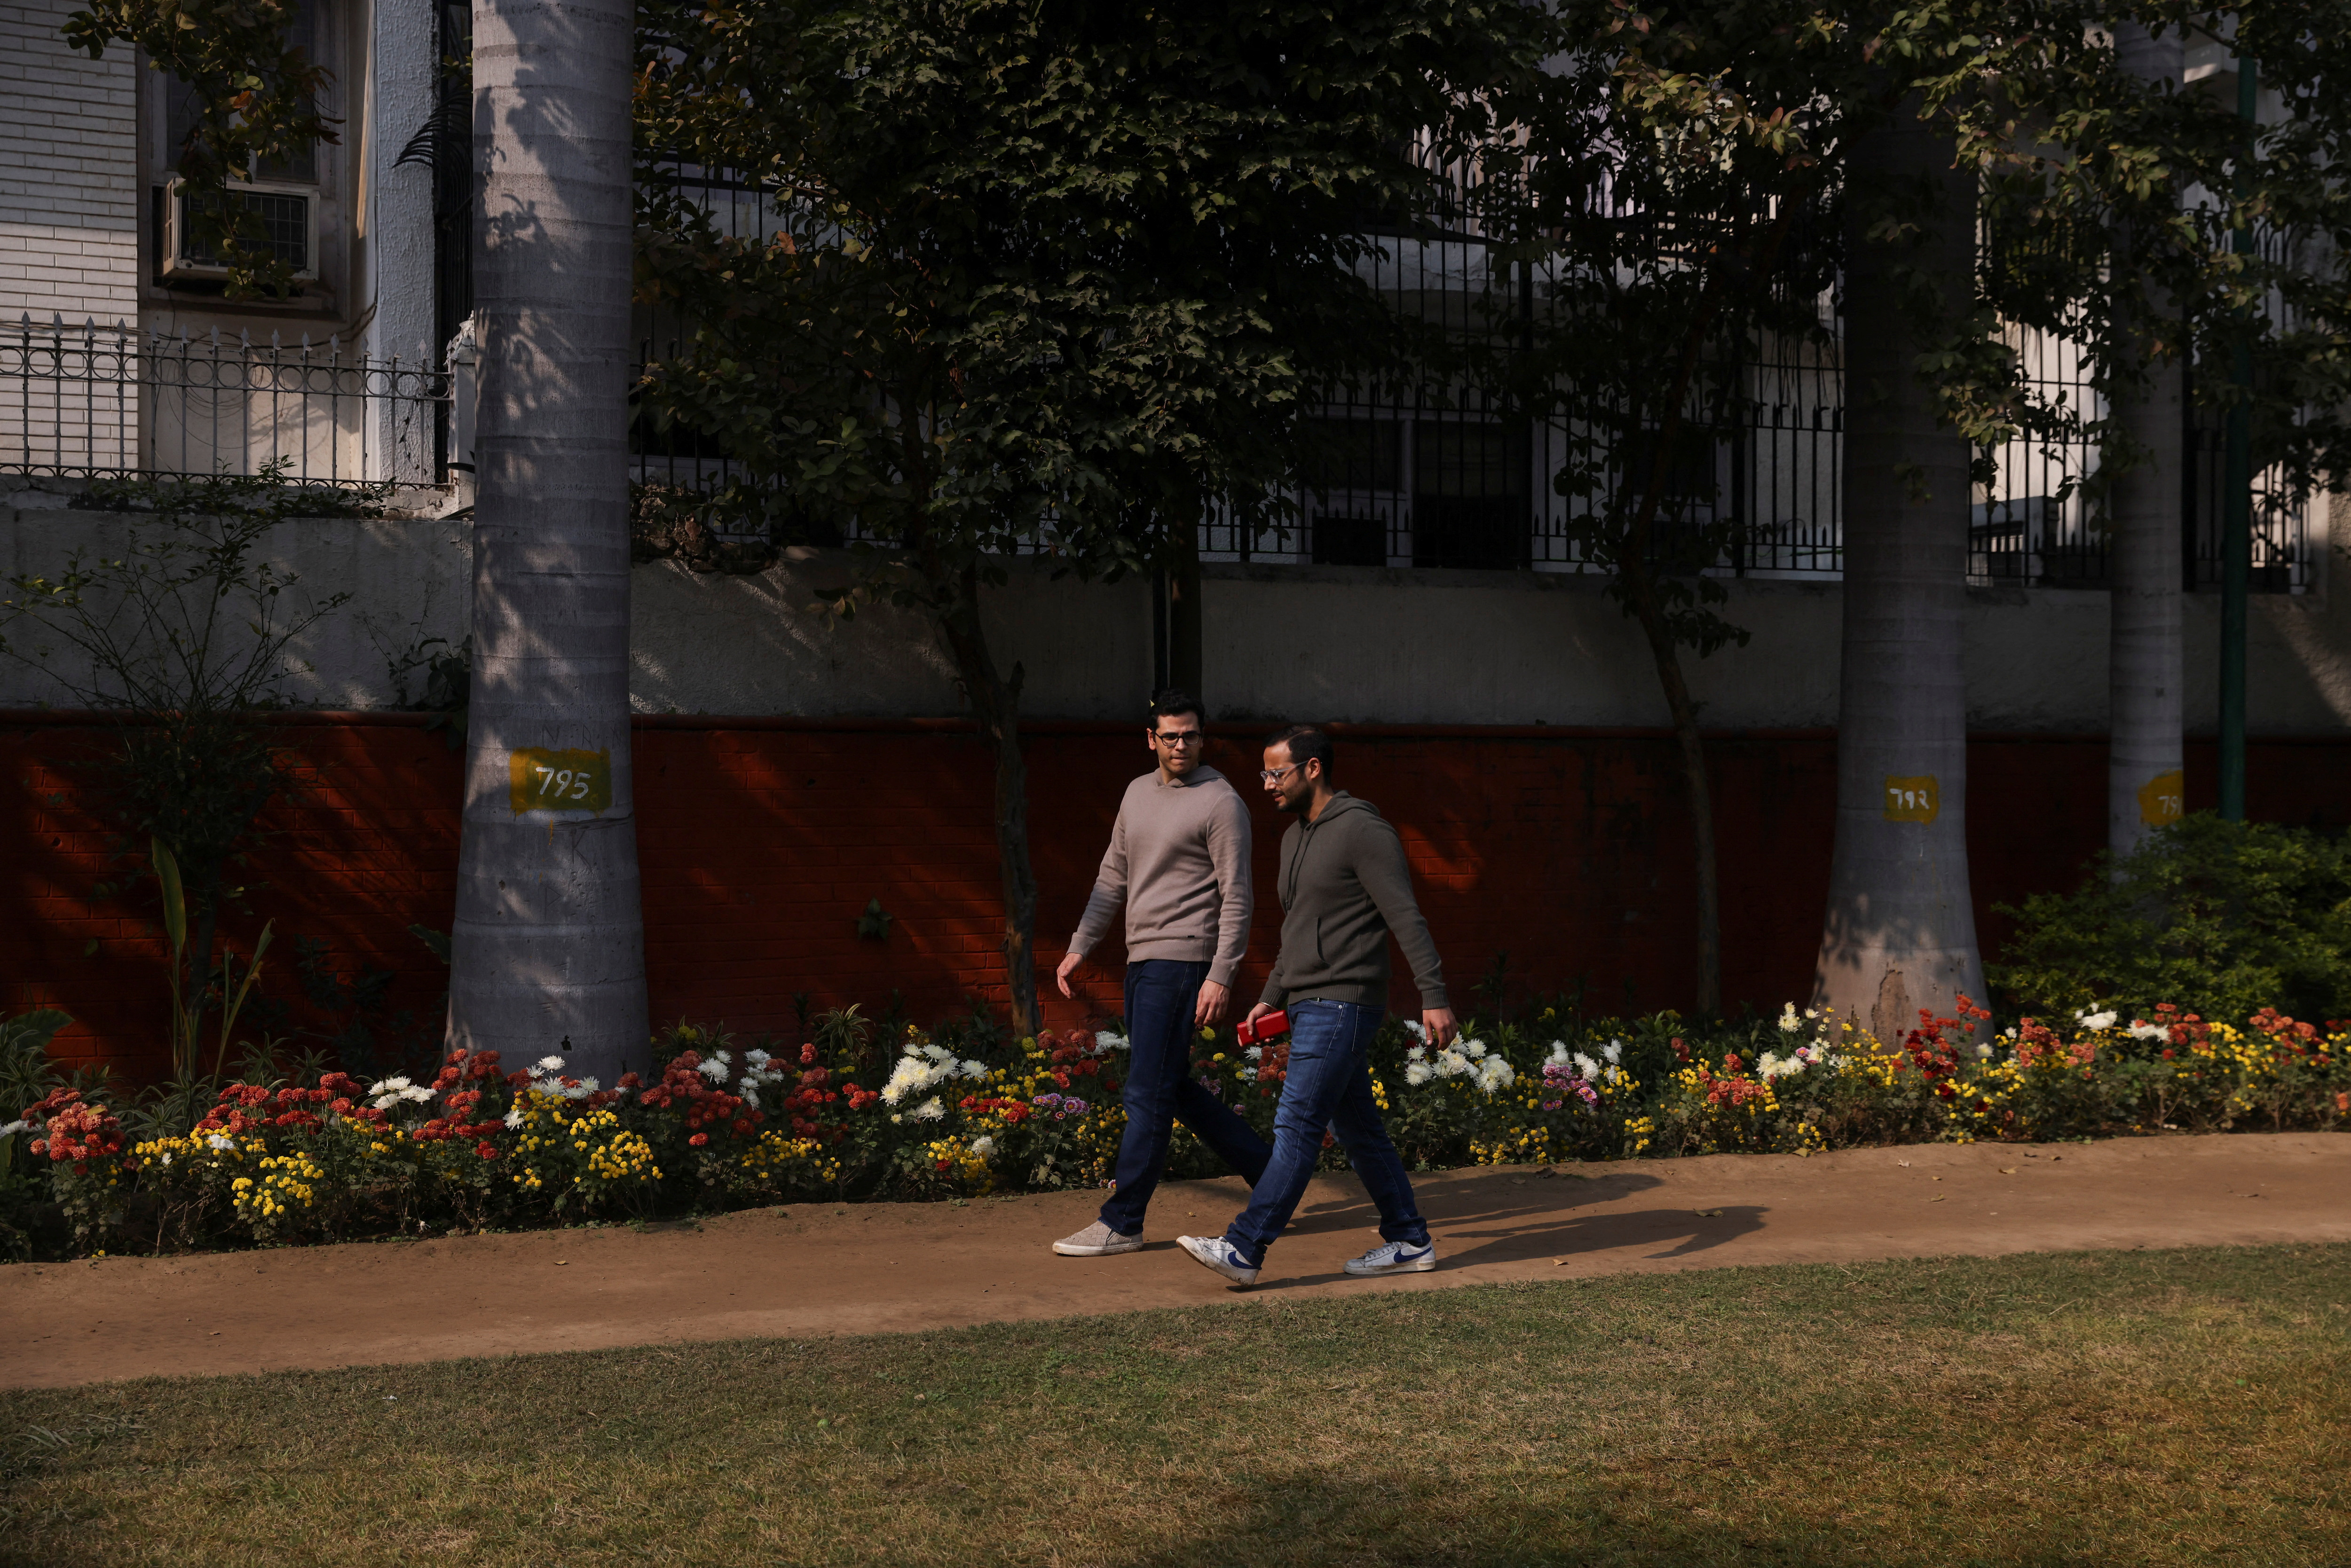 Parth Phiroze Mehrotra, 36, and his partner Uday Raj Anand, 35, walk in a park near their home in New Delhi